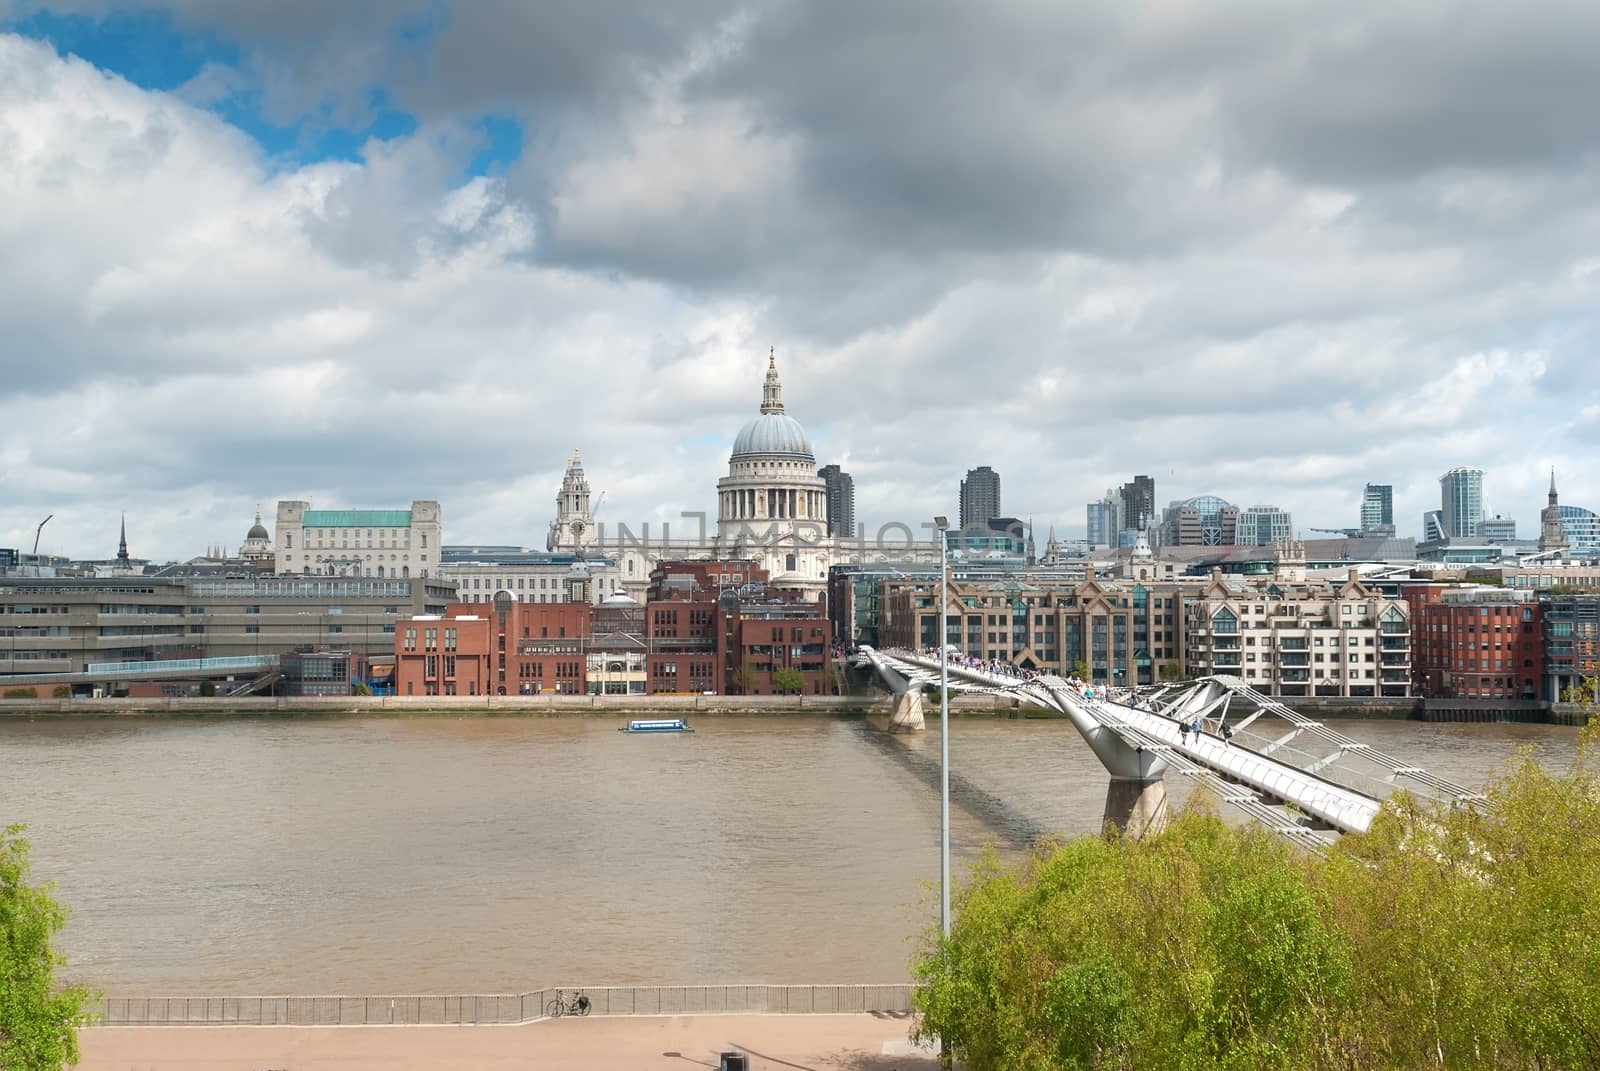 St. Paul's Cathedral and Millenium bridge by mitakag